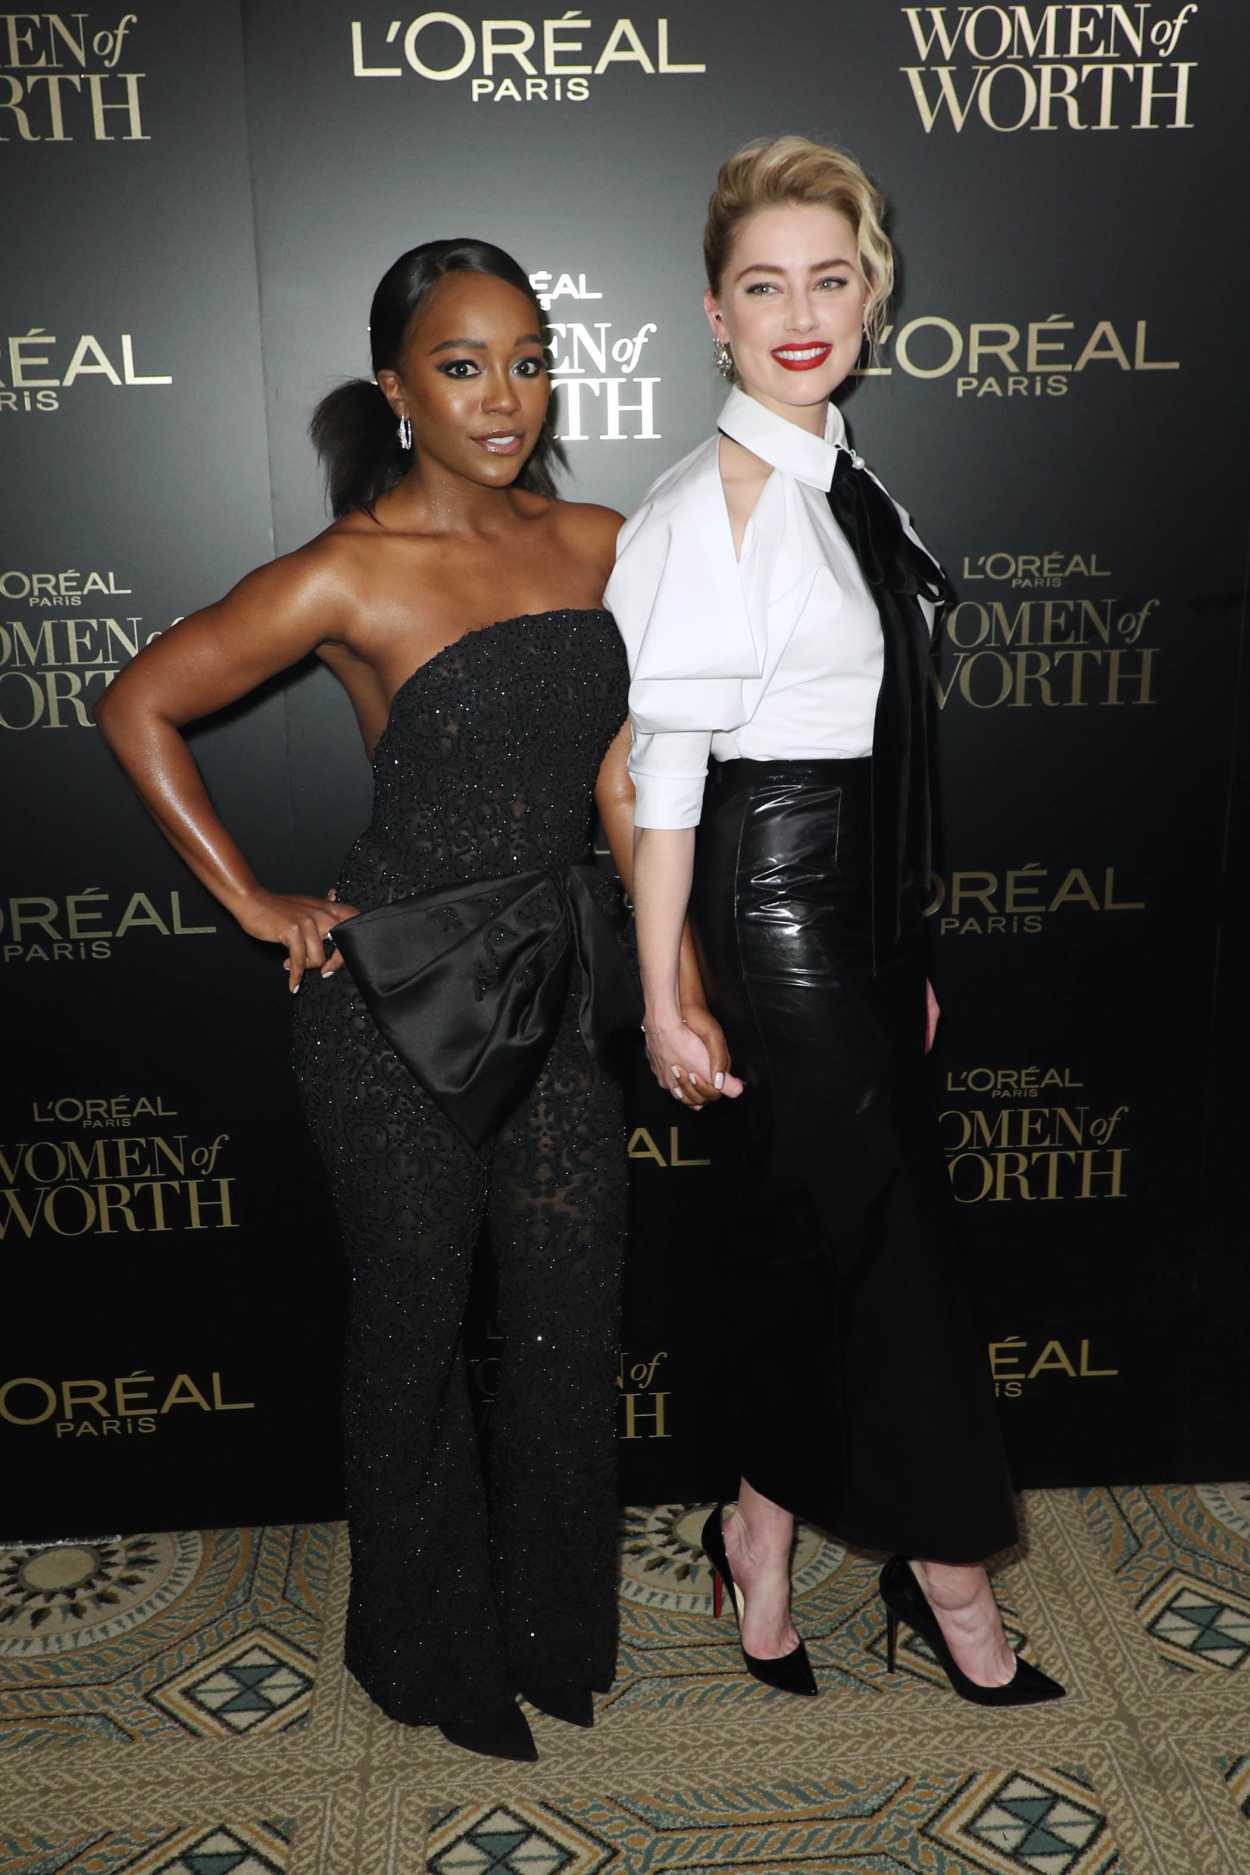 Amber Heard Attends the 14th Annual L’Oreal Paris Women of Worth Awards